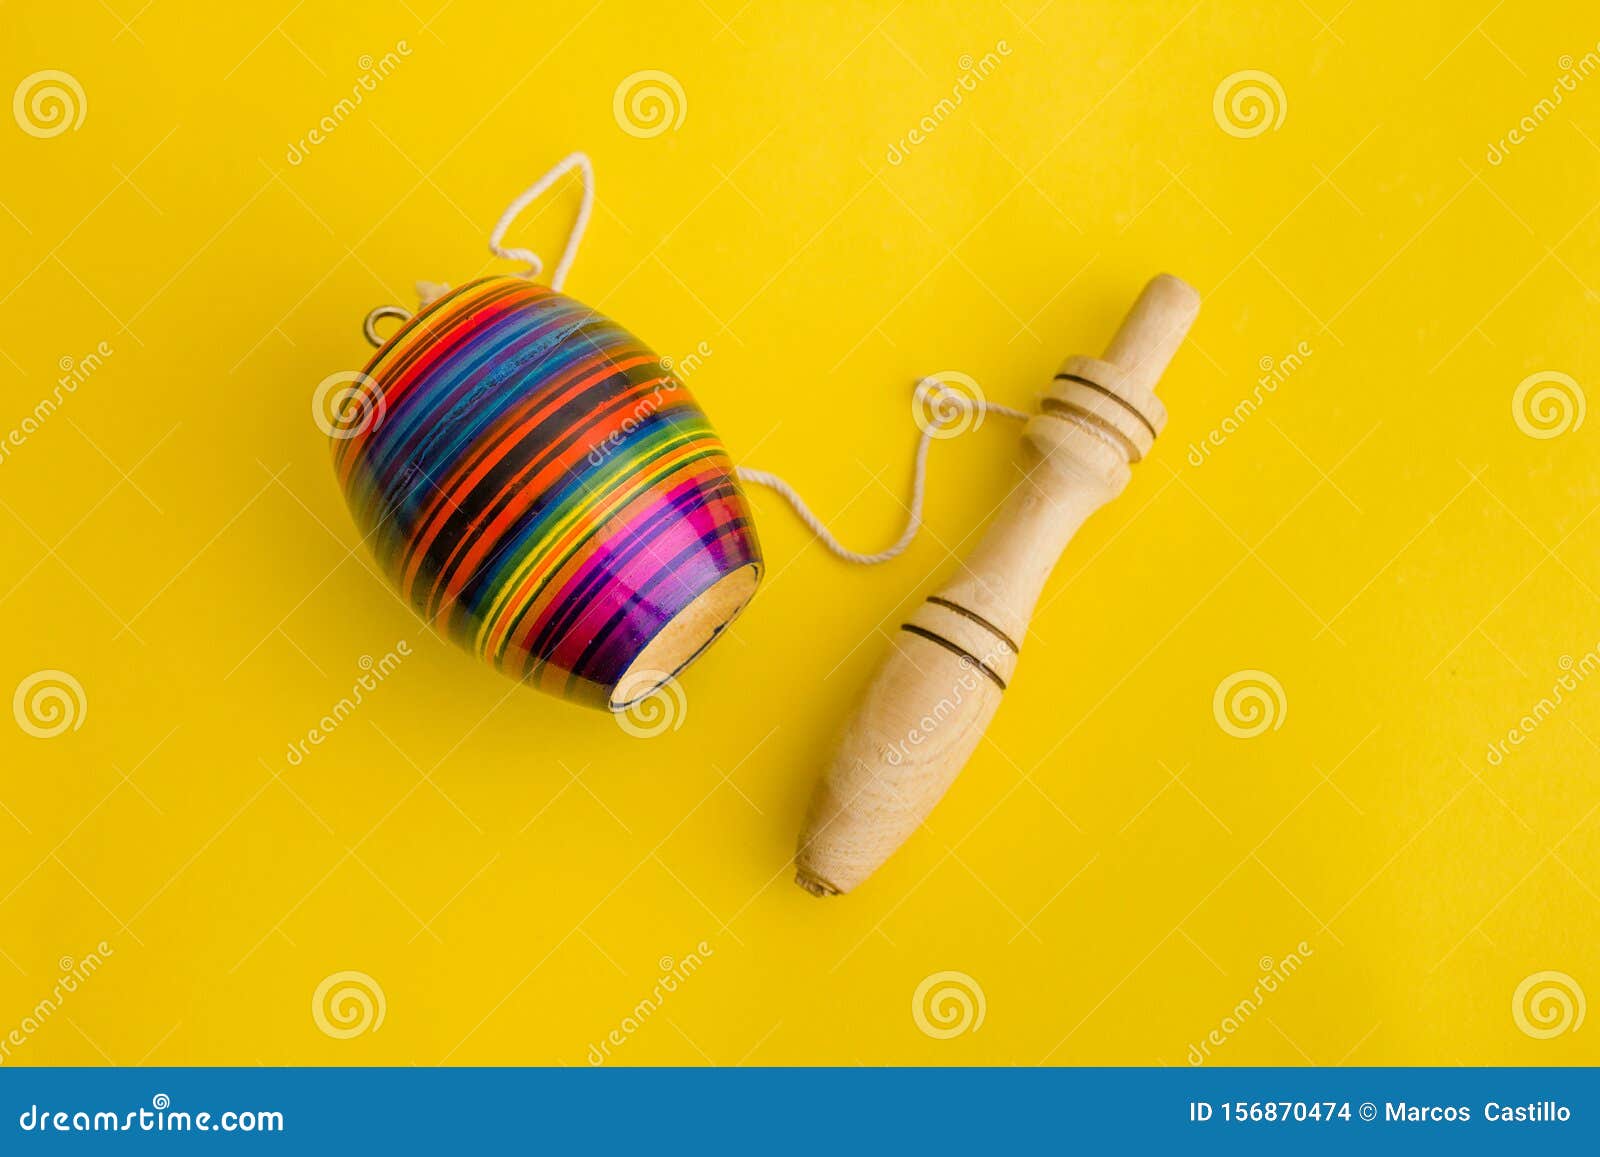 mexican toys, balero from wooden in mexico on yellow background